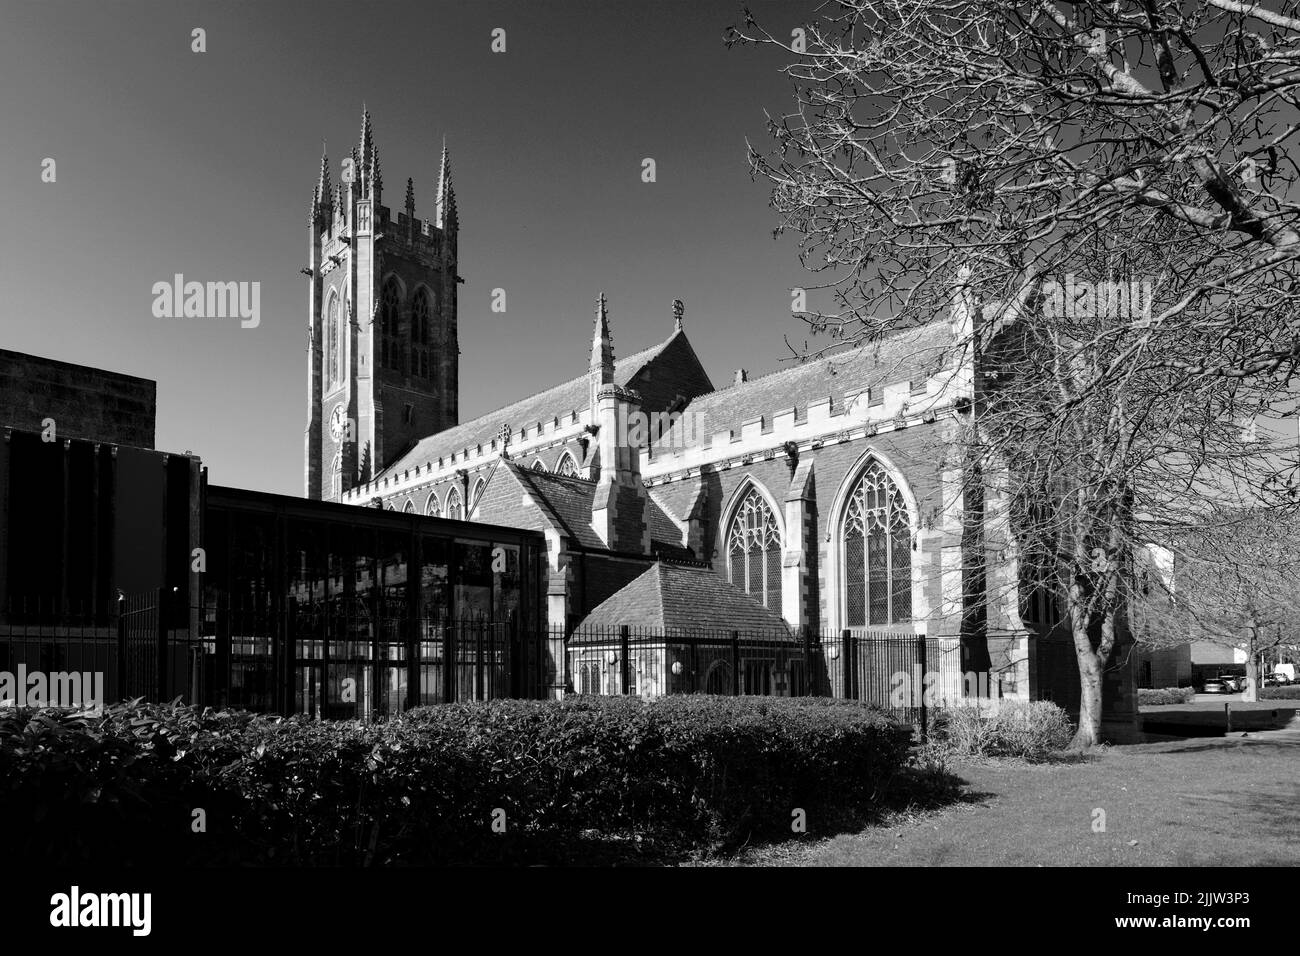 St John's Church, now a Visual Arts Centre, Scunthorpe town, Lincolnshire County, England, UK Stock Photo